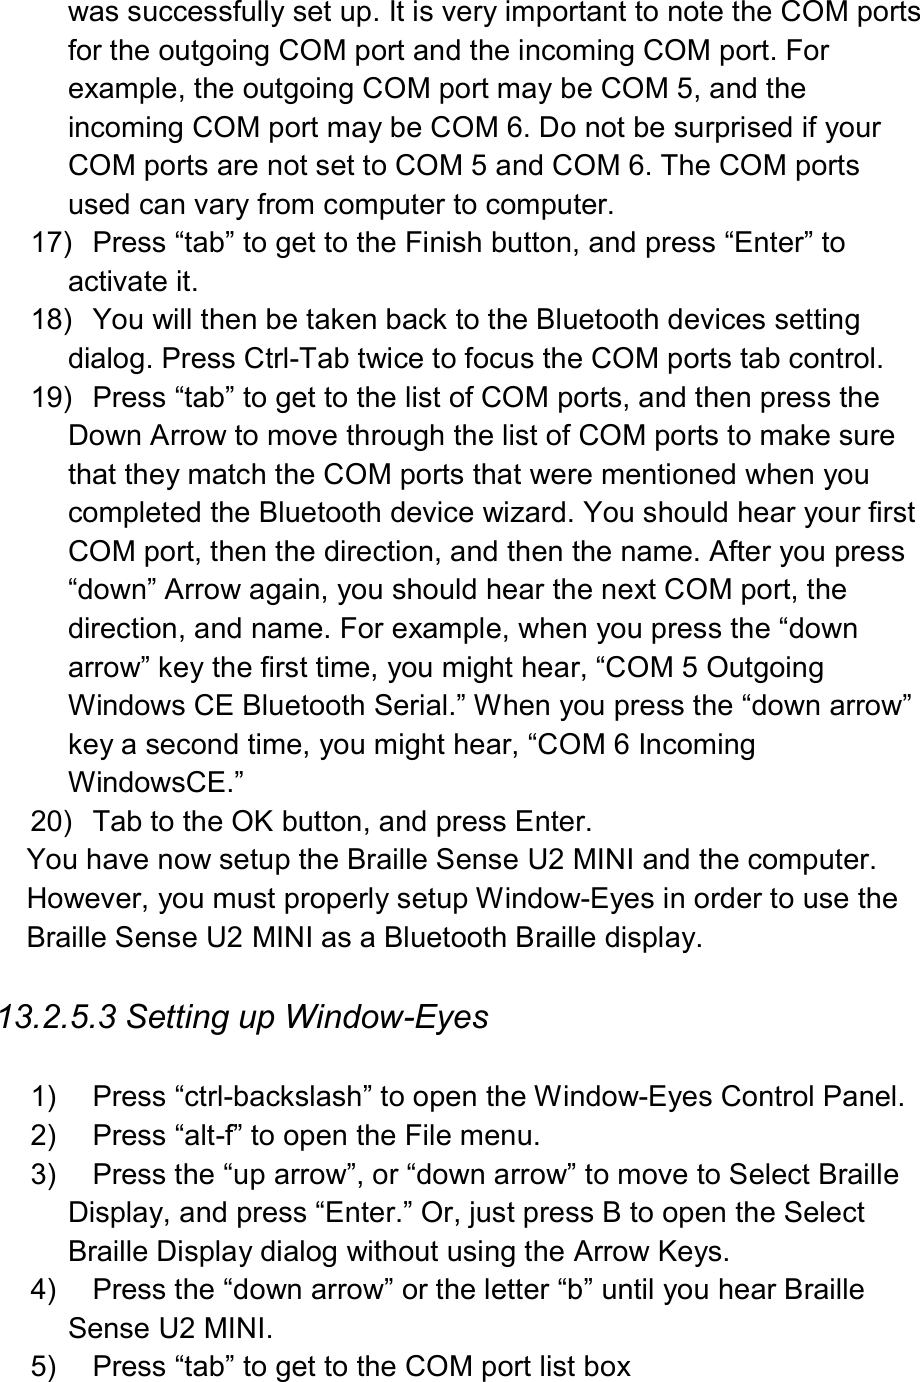  was successfully set up. It is very important to note the COM ports for the outgoing COM port and the incoming COM port. For example, the outgoing COM port may be COM 5, and the incoming COM port may be COM 6. Do not be surprised if your COM ports are not set to COM 5 and COM 6. The COM ports used can vary from computer to computer. 17)  Press “tab” to get to the Finish button, and press “Enter” to activate it. 18)  You will then be taken back to the Bluetooth devices setting dialog. Press Ctrl-Tab twice to focus the COM ports tab control. 19)  Press “tab” to get to the list of COM ports, and then press the Down Arrow to move through the list of COM ports to make sure that they match the COM ports that were mentioned when you completed the Bluetooth device wizard. You should hear your first COM port, then the direction, and then the name. After you press “down” Arrow again, you should hear the next COM port, the direction, and name. For example, when you press the “down arrow” key the first time, you might hear, “COM 5 Outgoing Windows CE Bluetooth Serial.” When you press the “down arrow” key a second time, you might hear, “COM 6 Incoming WindowsCE.” 20)  Tab to the OK button, and press Enter. You have now setup the Braille Sense U2 MINI and the computer. However, you must properly setup Window-Eyes in order to use the Braille Sense U2 MINI as a Bluetooth Braille display.  13.2.5.3 Setting up Window-Eyes  1)  Press “ctrl-backslash” to open the Window-Eyes Control Panel. 2)  Press “alt-f” to open the File menu. 3)  Press the “up arrow”, or “down arrow” to move to Select Braille Display, and press “Enter.” Or, just press B to open the Select Braille Display dialog without using the Arrow Keys. 4)  Press the “down arrow” or the letter “b” until you hear Braille Sense U2 MINI. 5)  Press “tab” to get to the COM port list box 